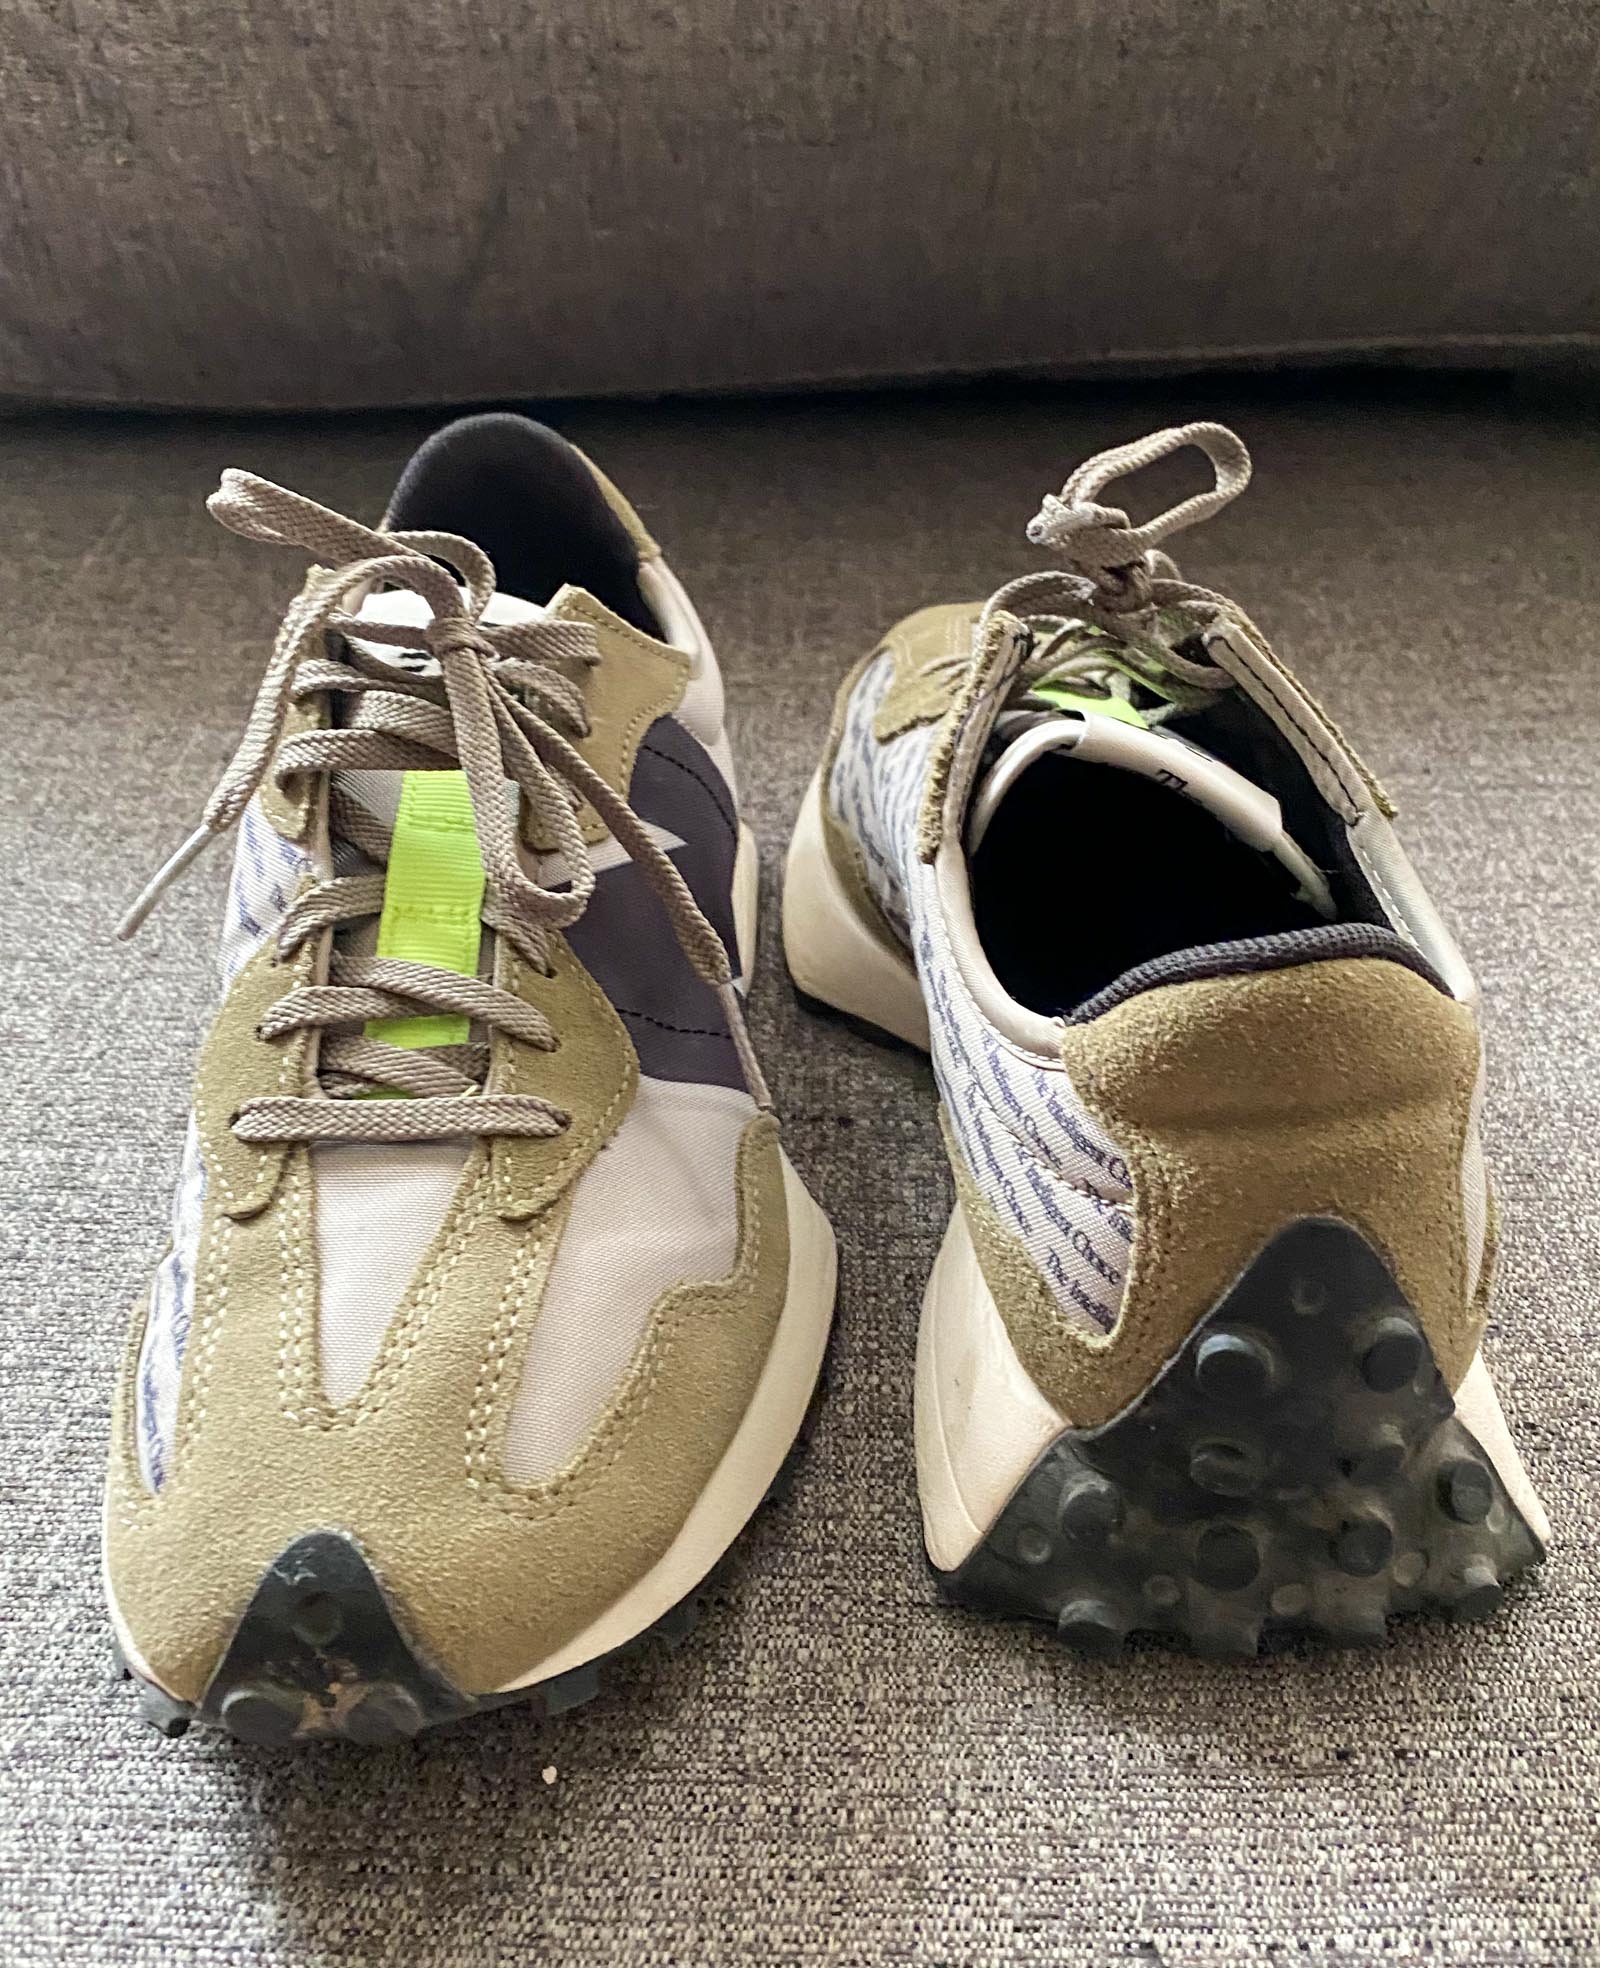 New Balance 327 sneaker review ⋆ chic everywhere